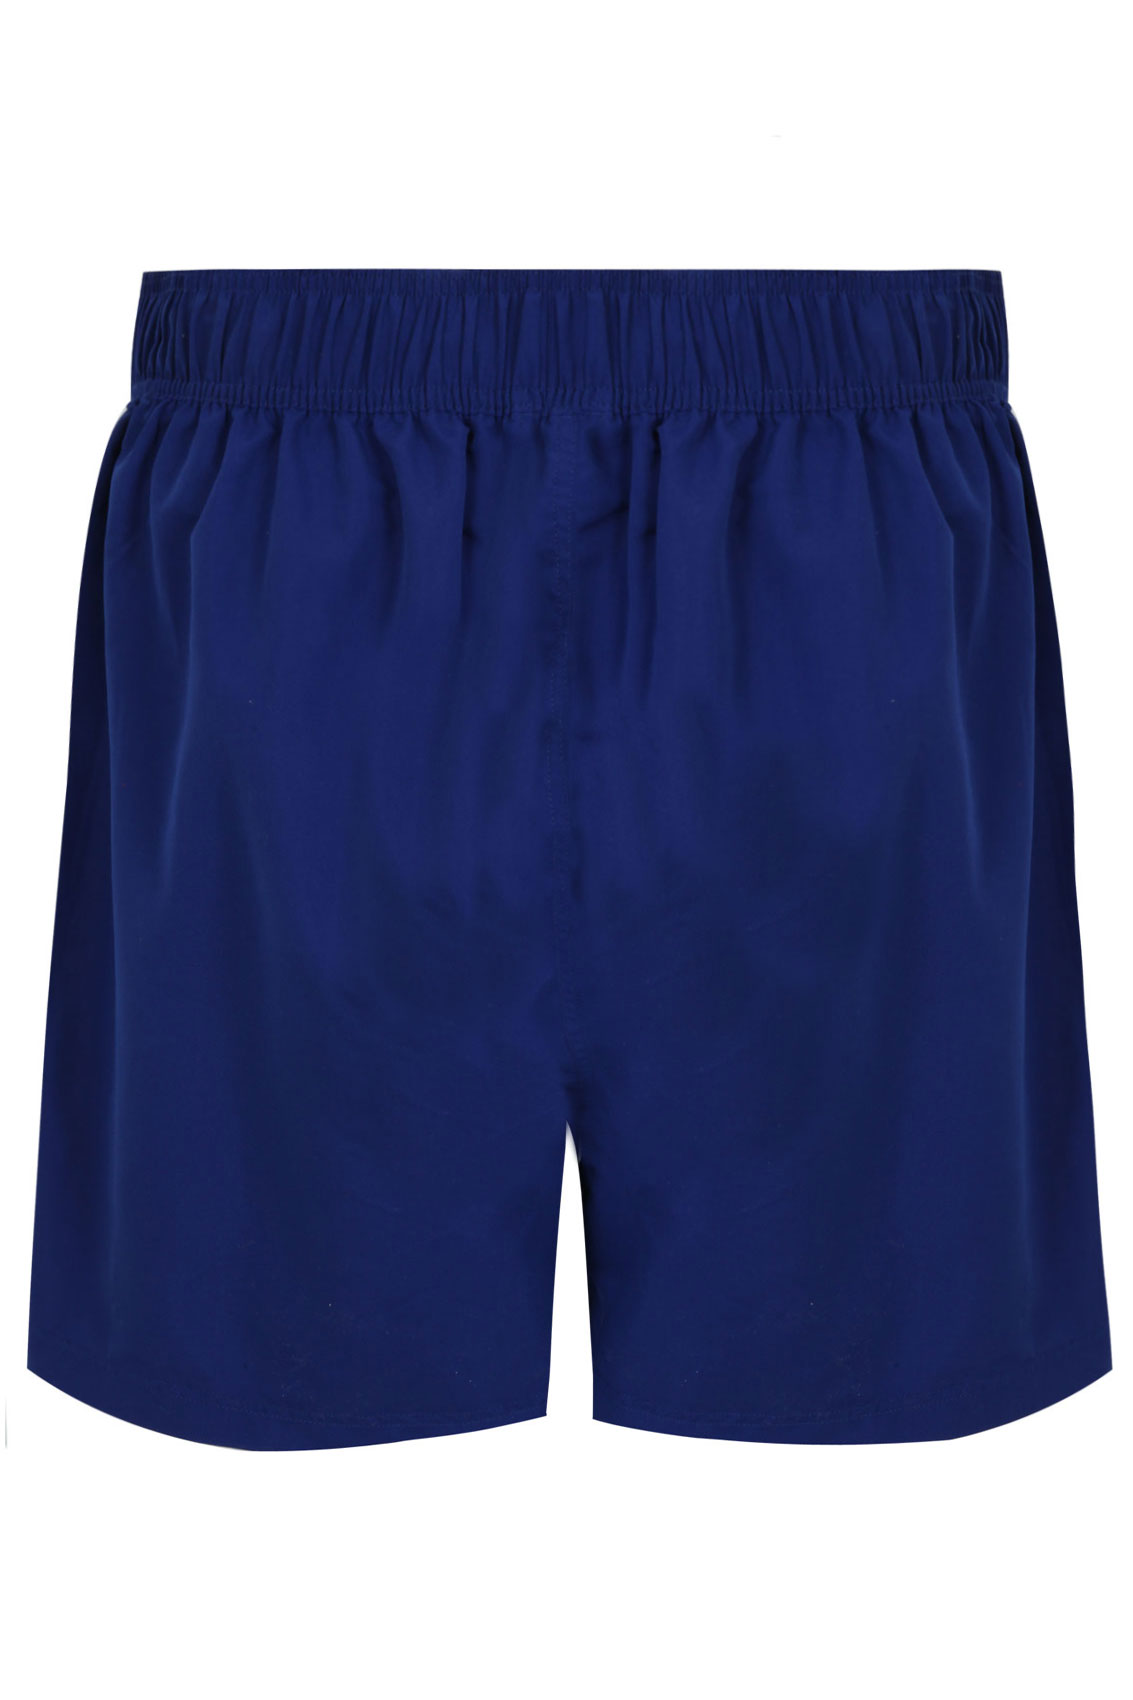 Blue Board Shorts With Drawstring Waist Plus Size 16 to 32